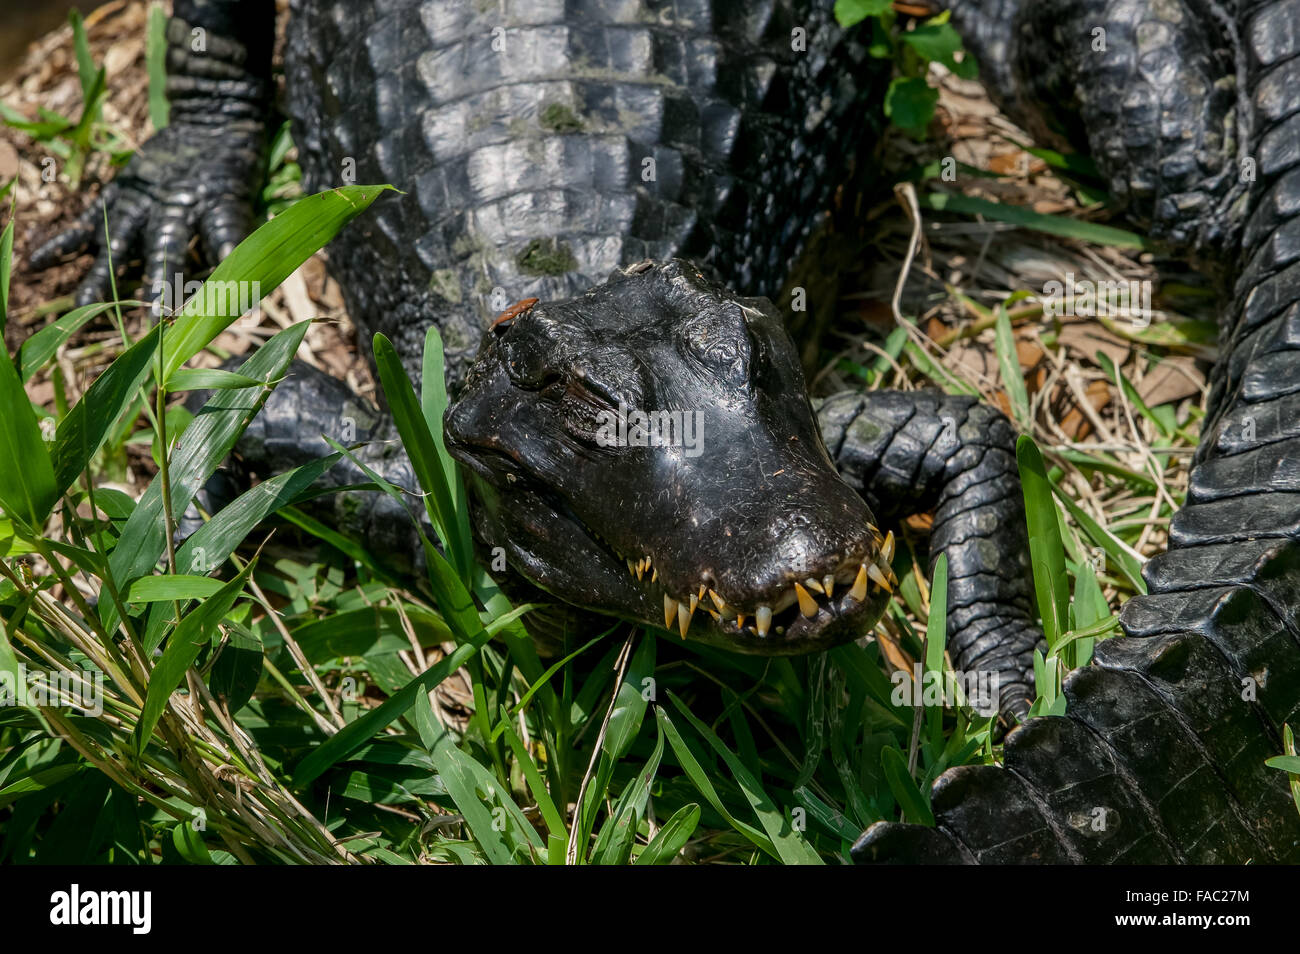 Close-up of a Dwarf Caiman showing many long yellowed teeth viewed from the front at the St. Augustine Alligator Farm, Florida. Stock Photo